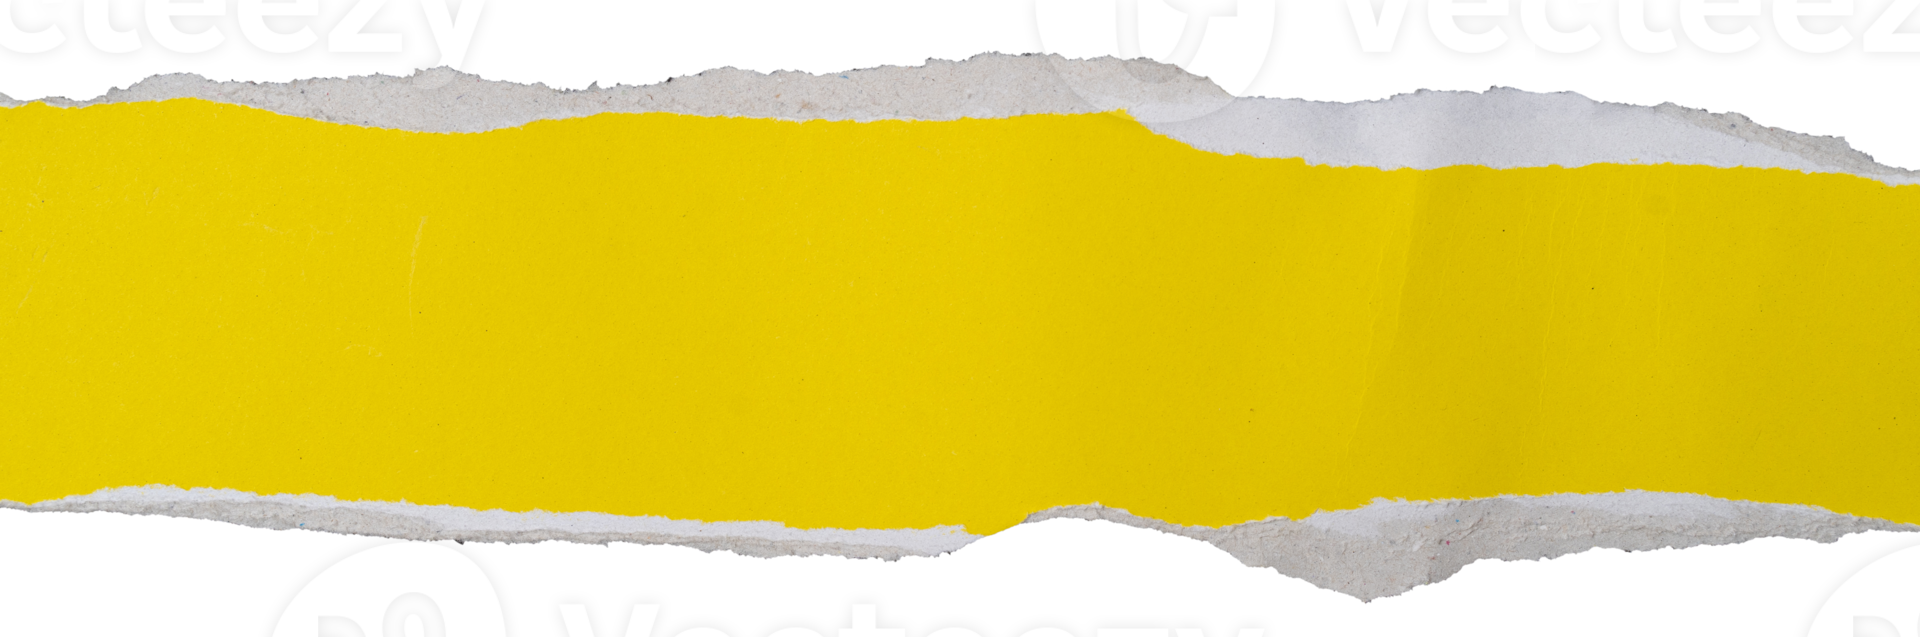 Yellow Ripped paper background, banner template. png